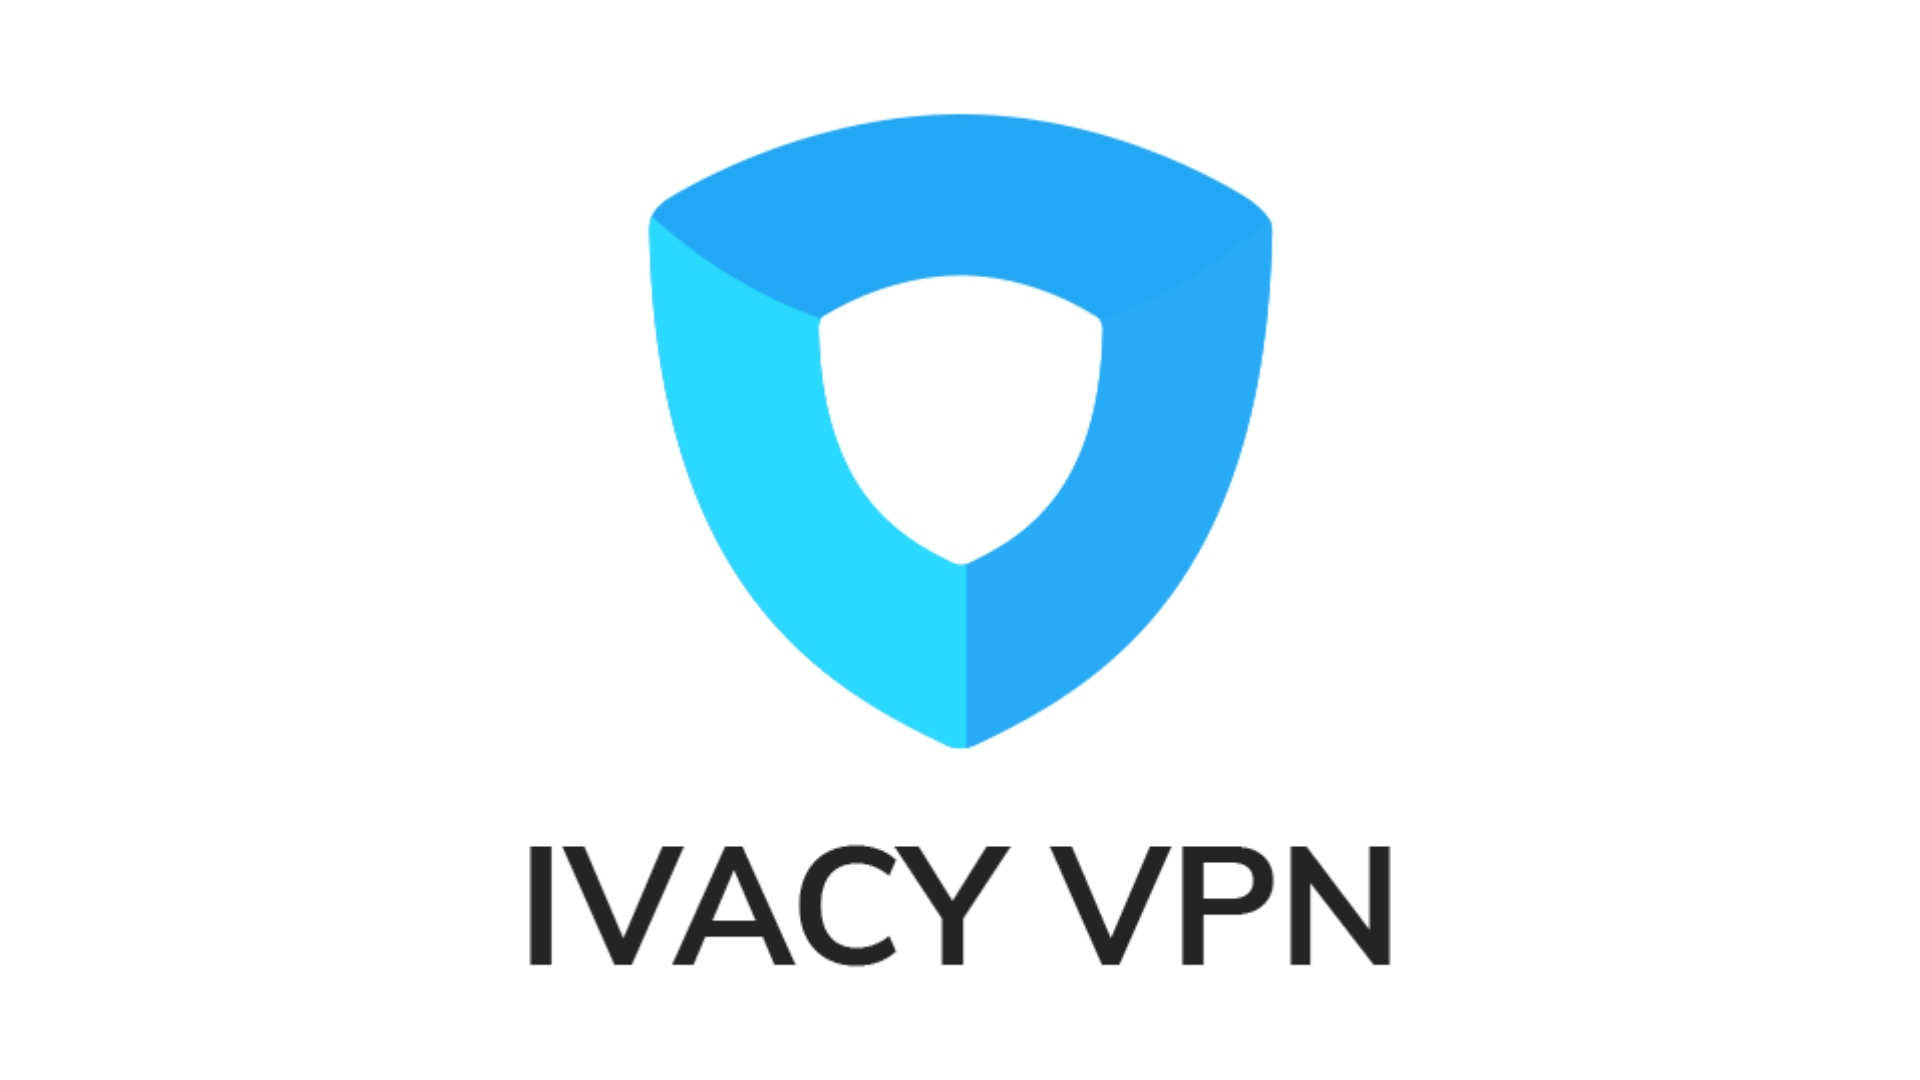 Best VPN for Android: Ivacy VPN. Image shows the company logo.